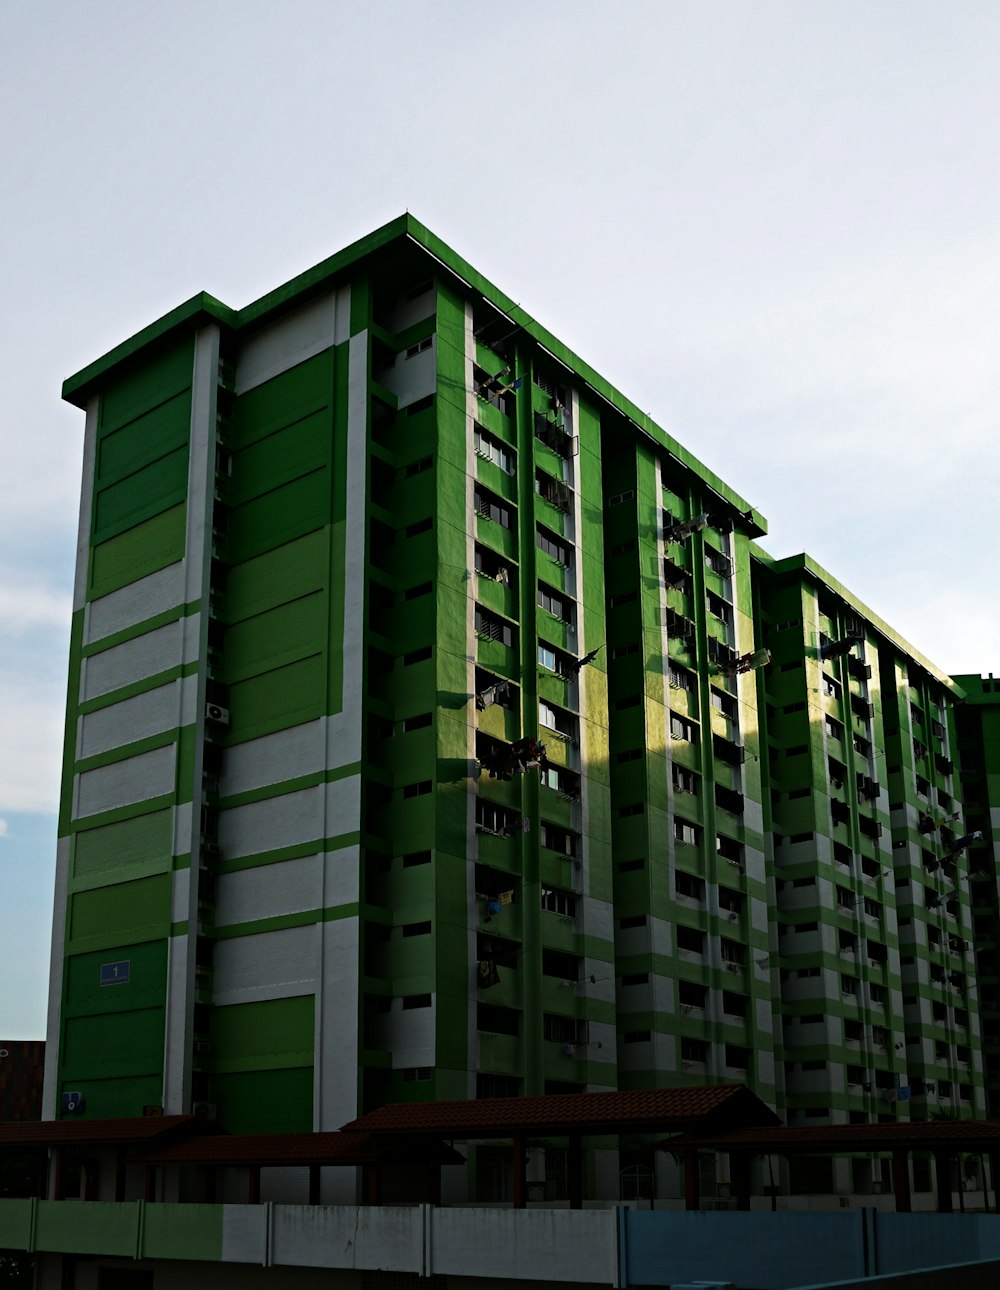 green and brown concrete building under blue sky during daytime